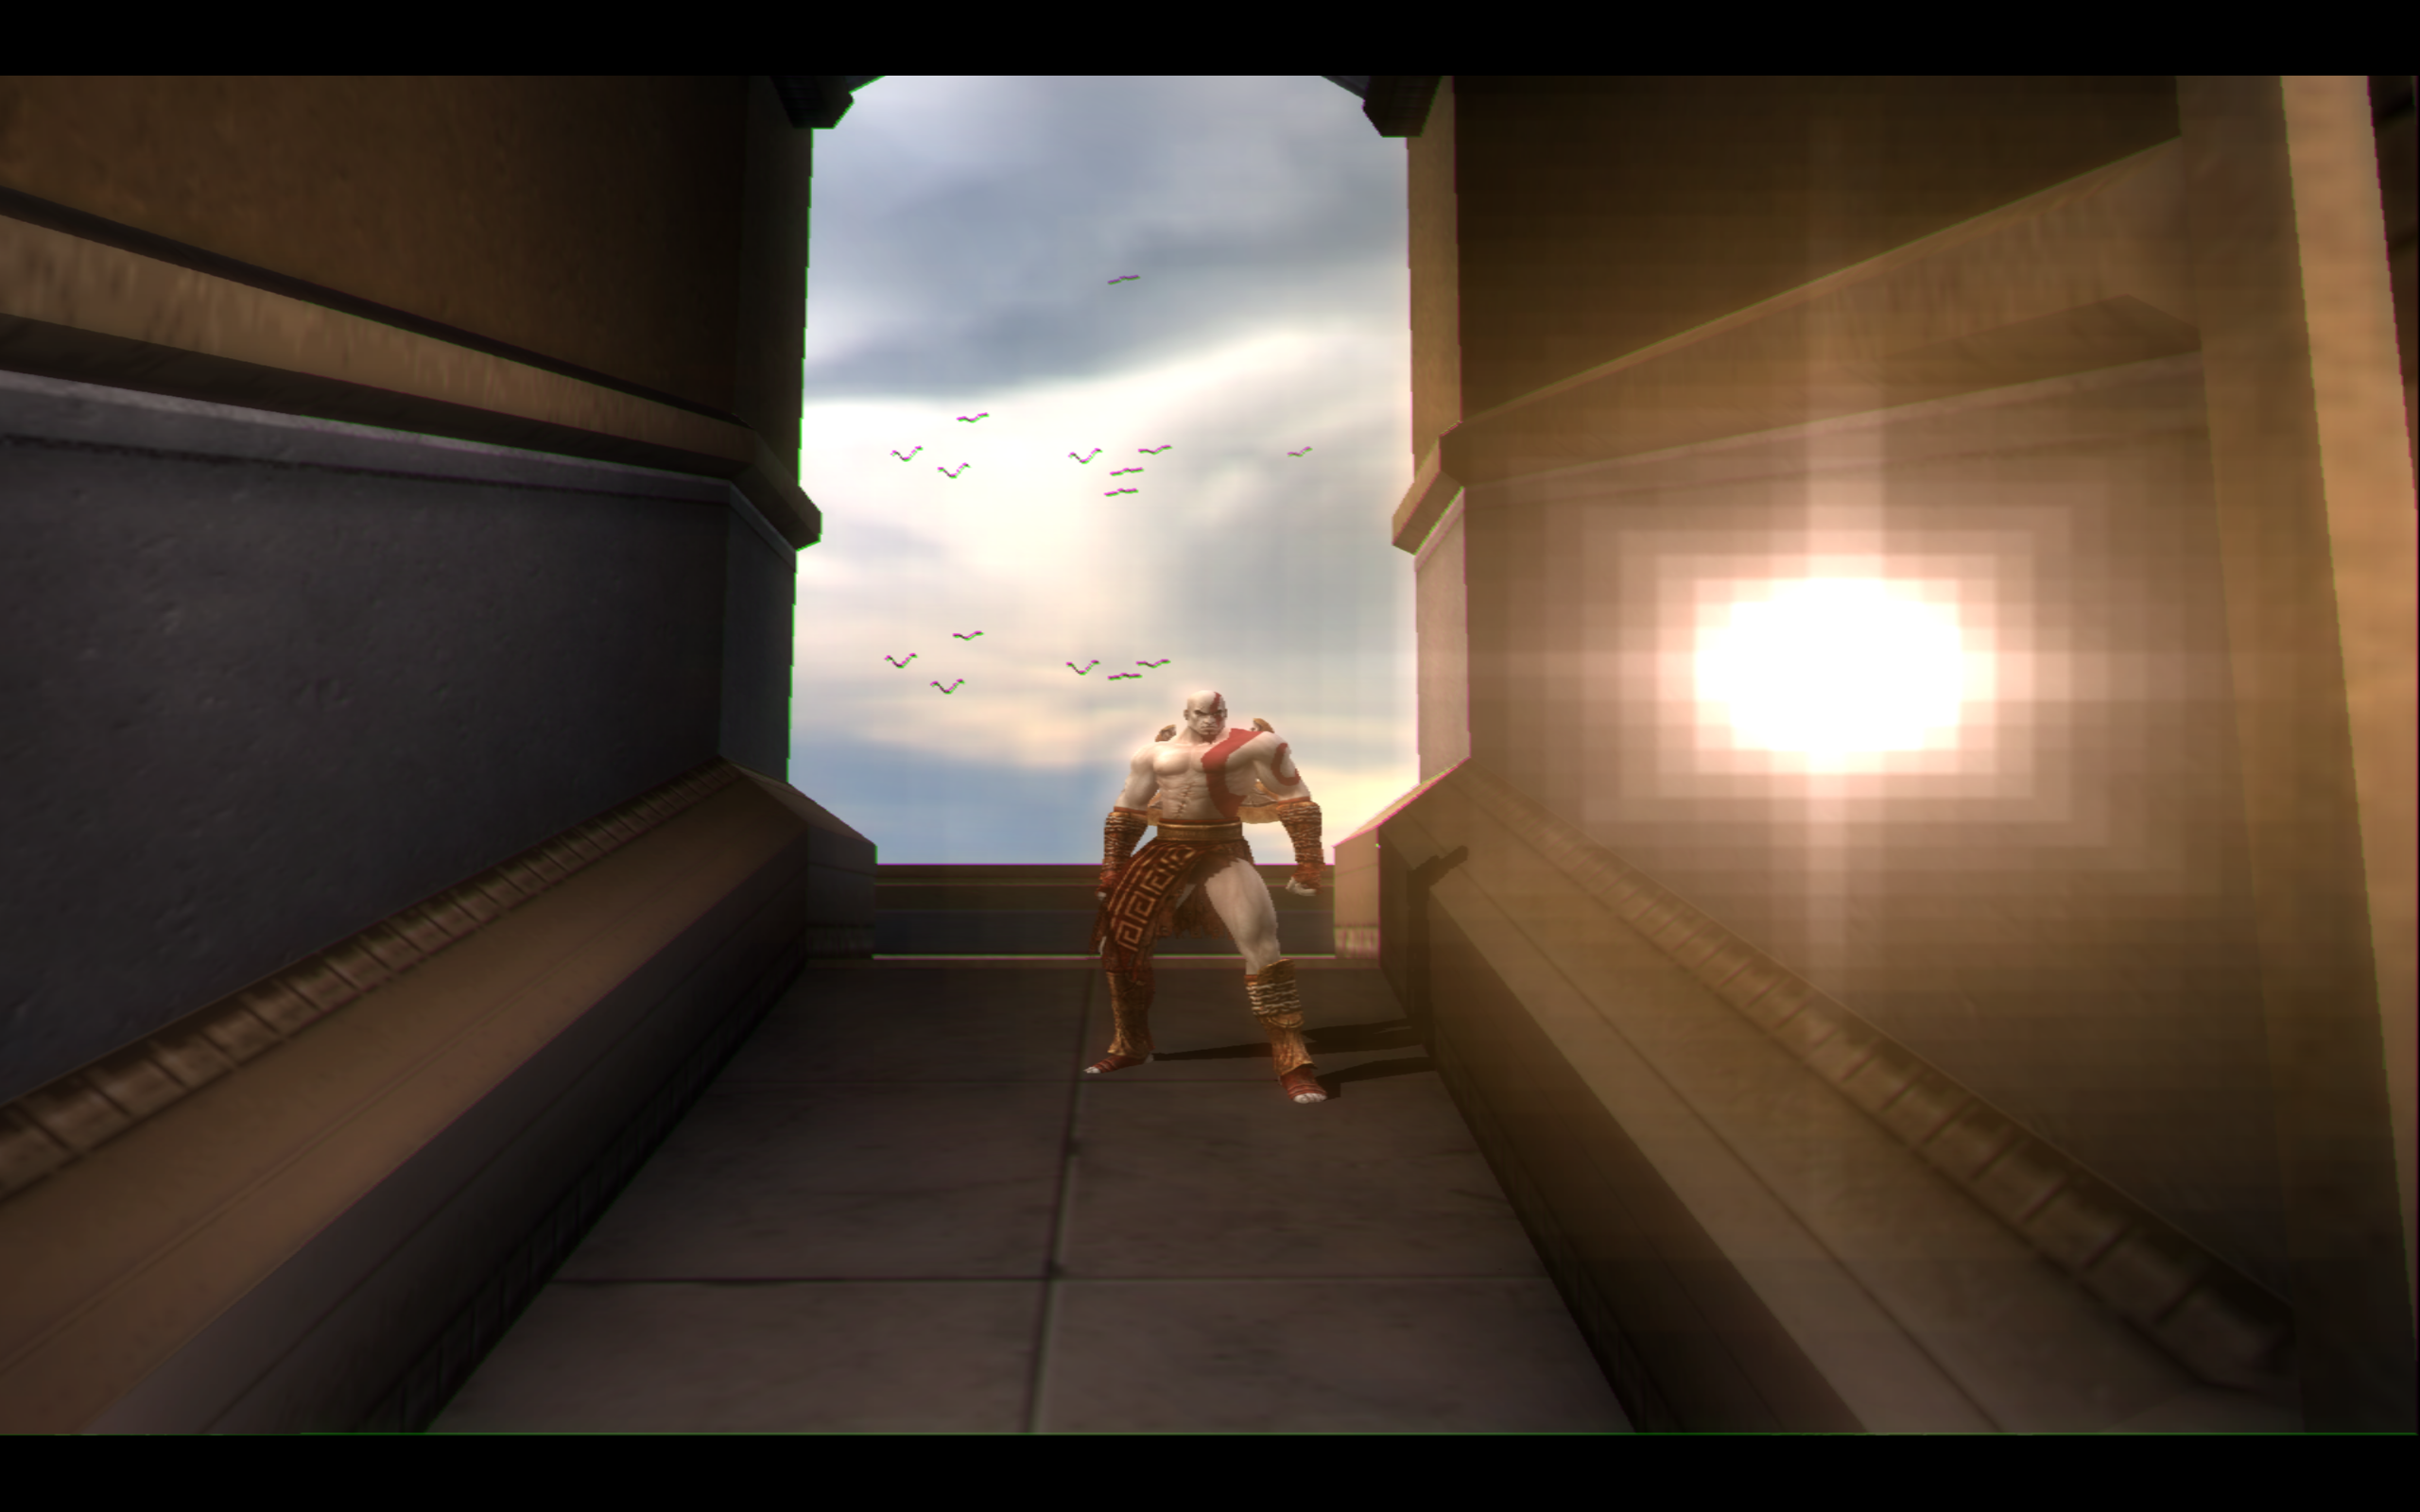 BUG]: GOD OF WAR 2 - sun is visible through walls and buildings · Issue  #5427 · PCSX2/pcsx2 · GitHub